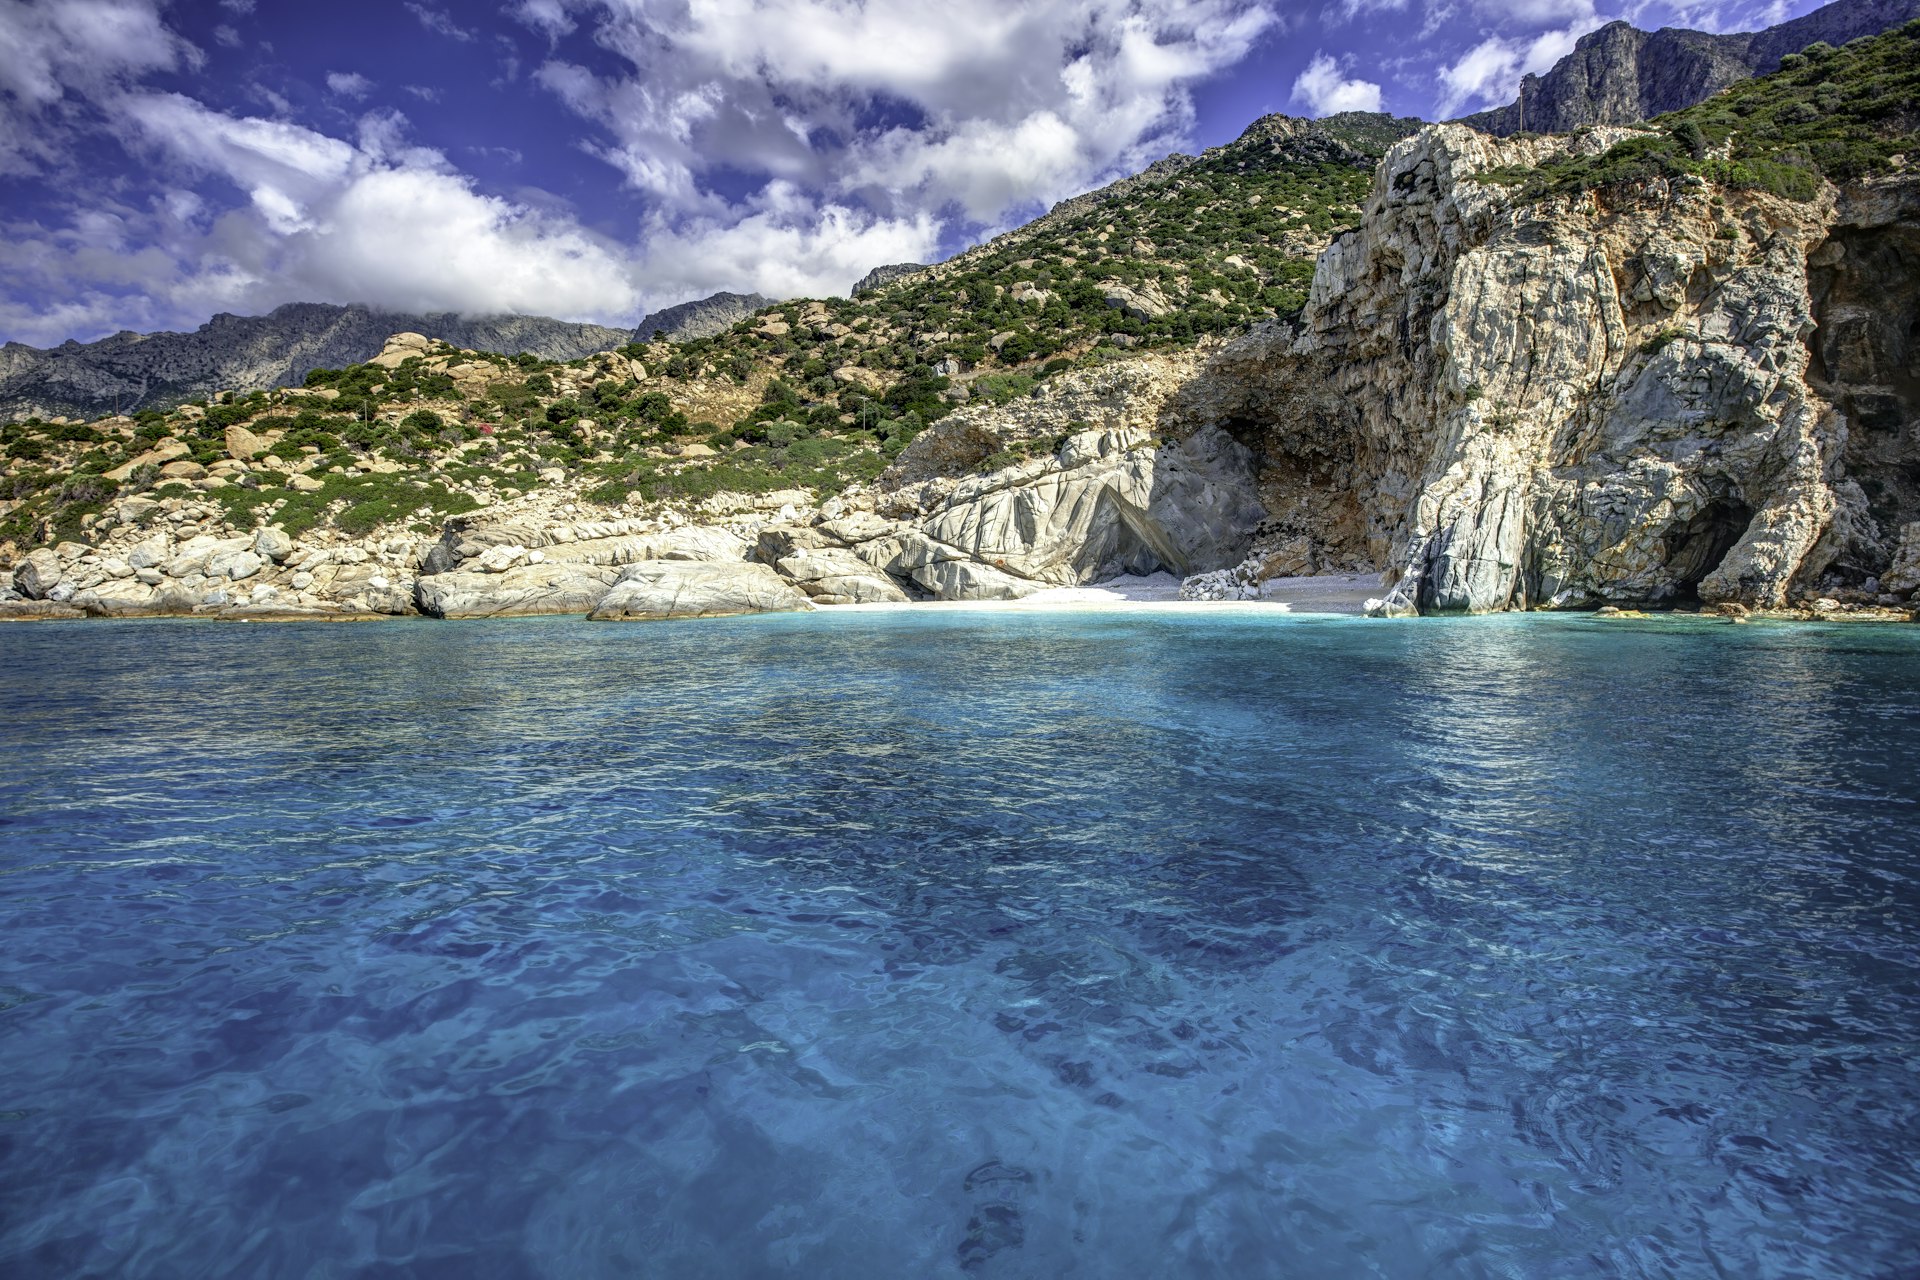 Best beaches in Greece - Lonely Planet